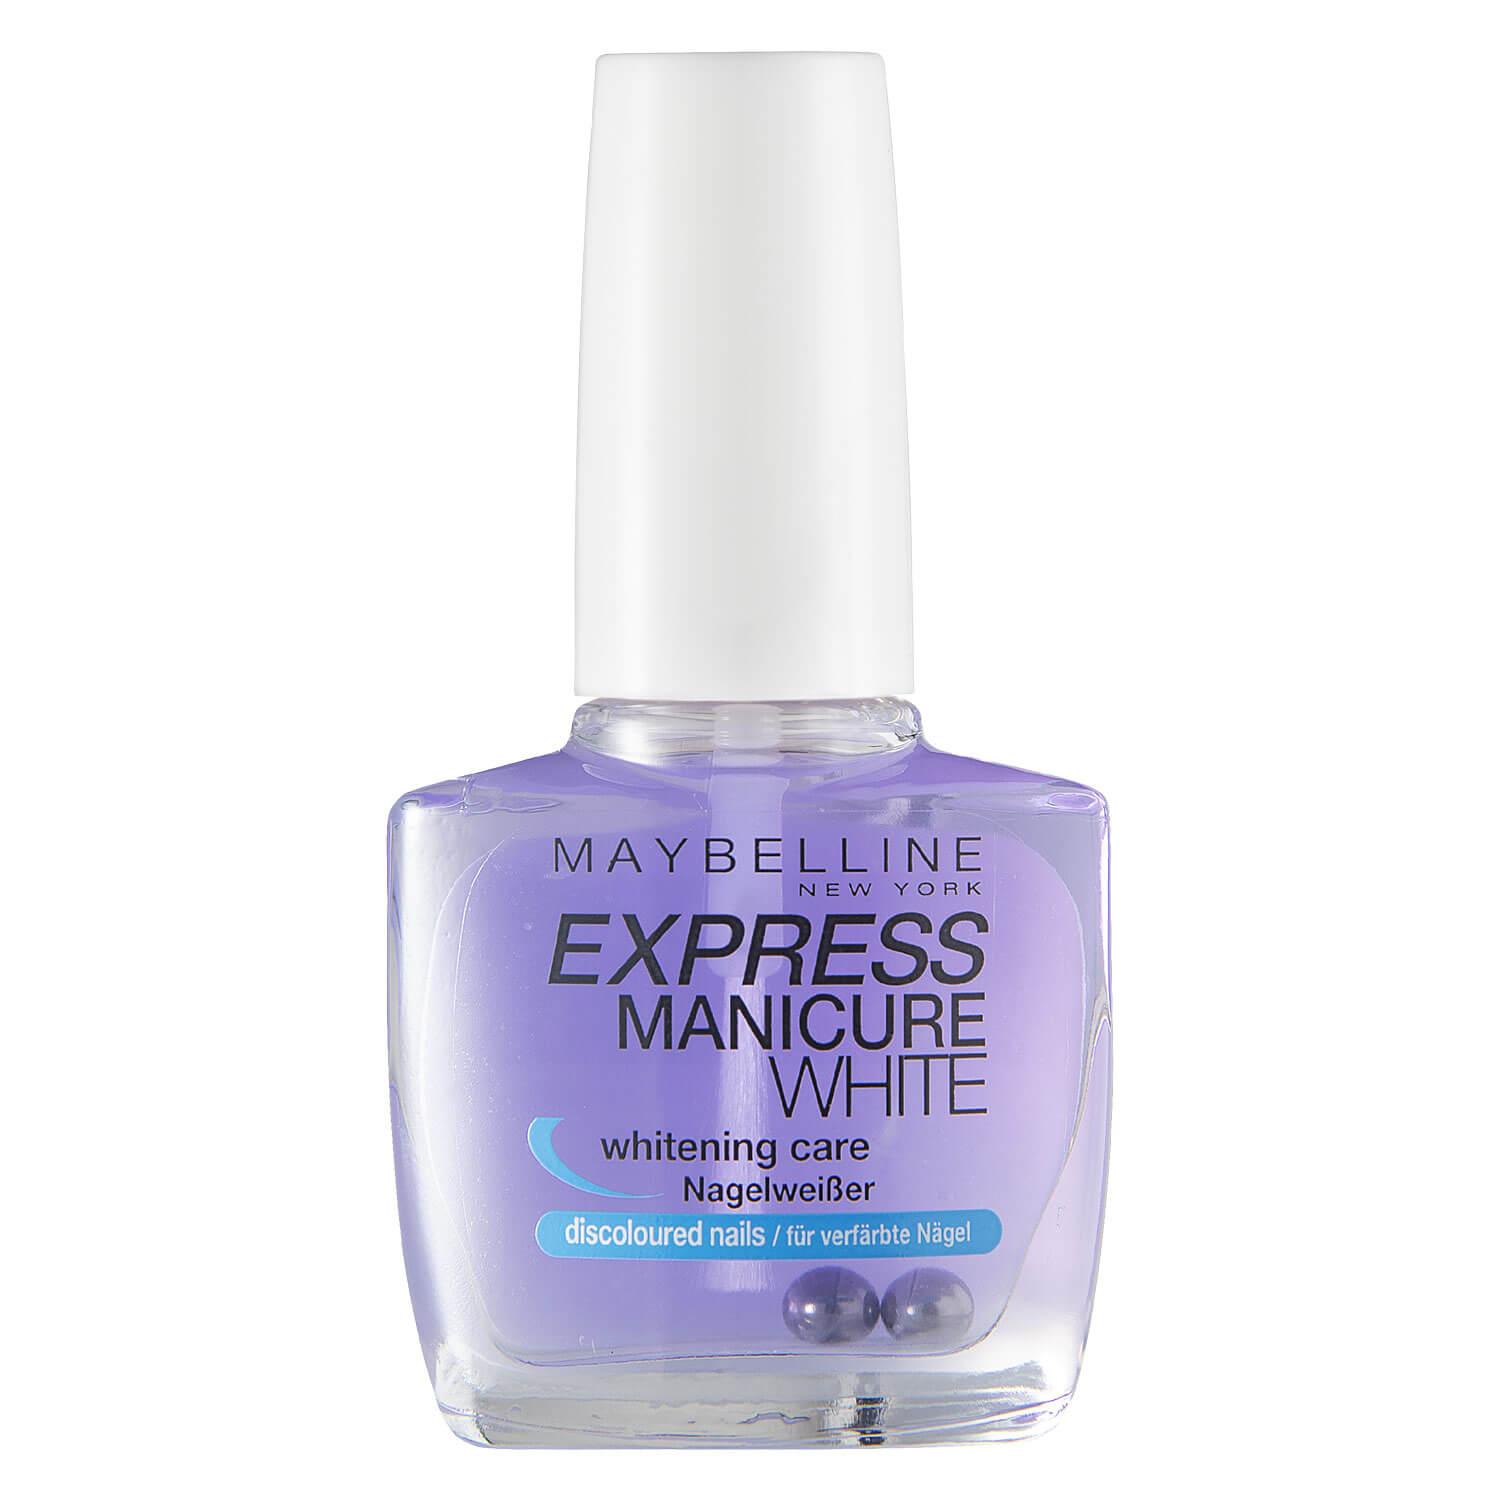 Maybelline NY Nails - Vernis a Ongles Express Manicure White Blister